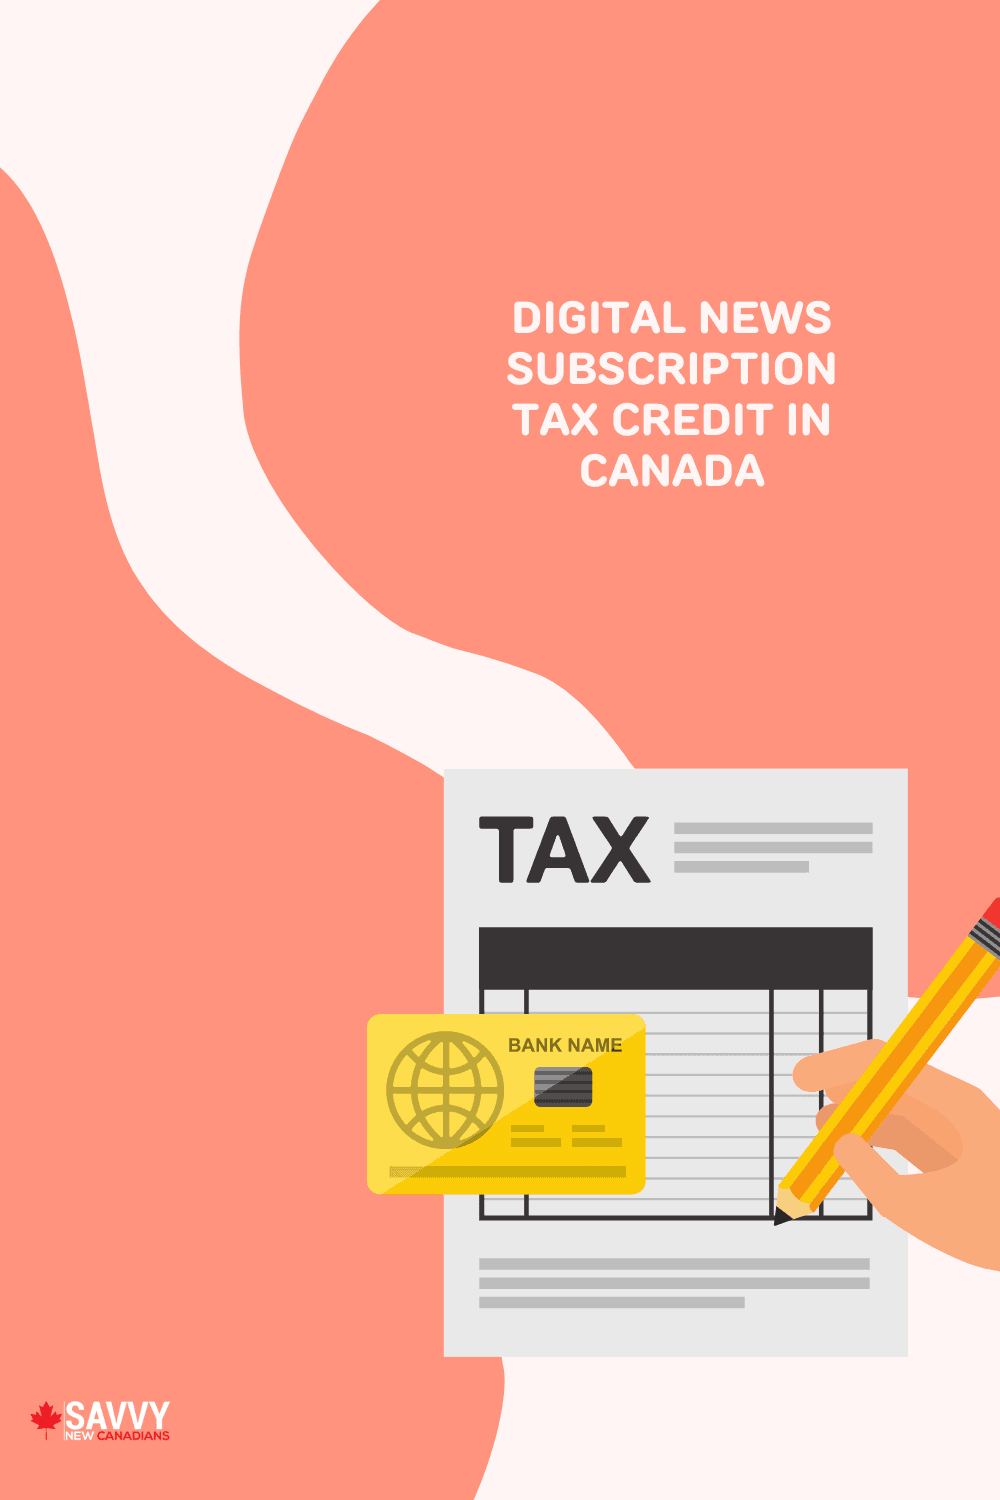 Digital News Subscription Tax Credit in Canada: What You Need To Know